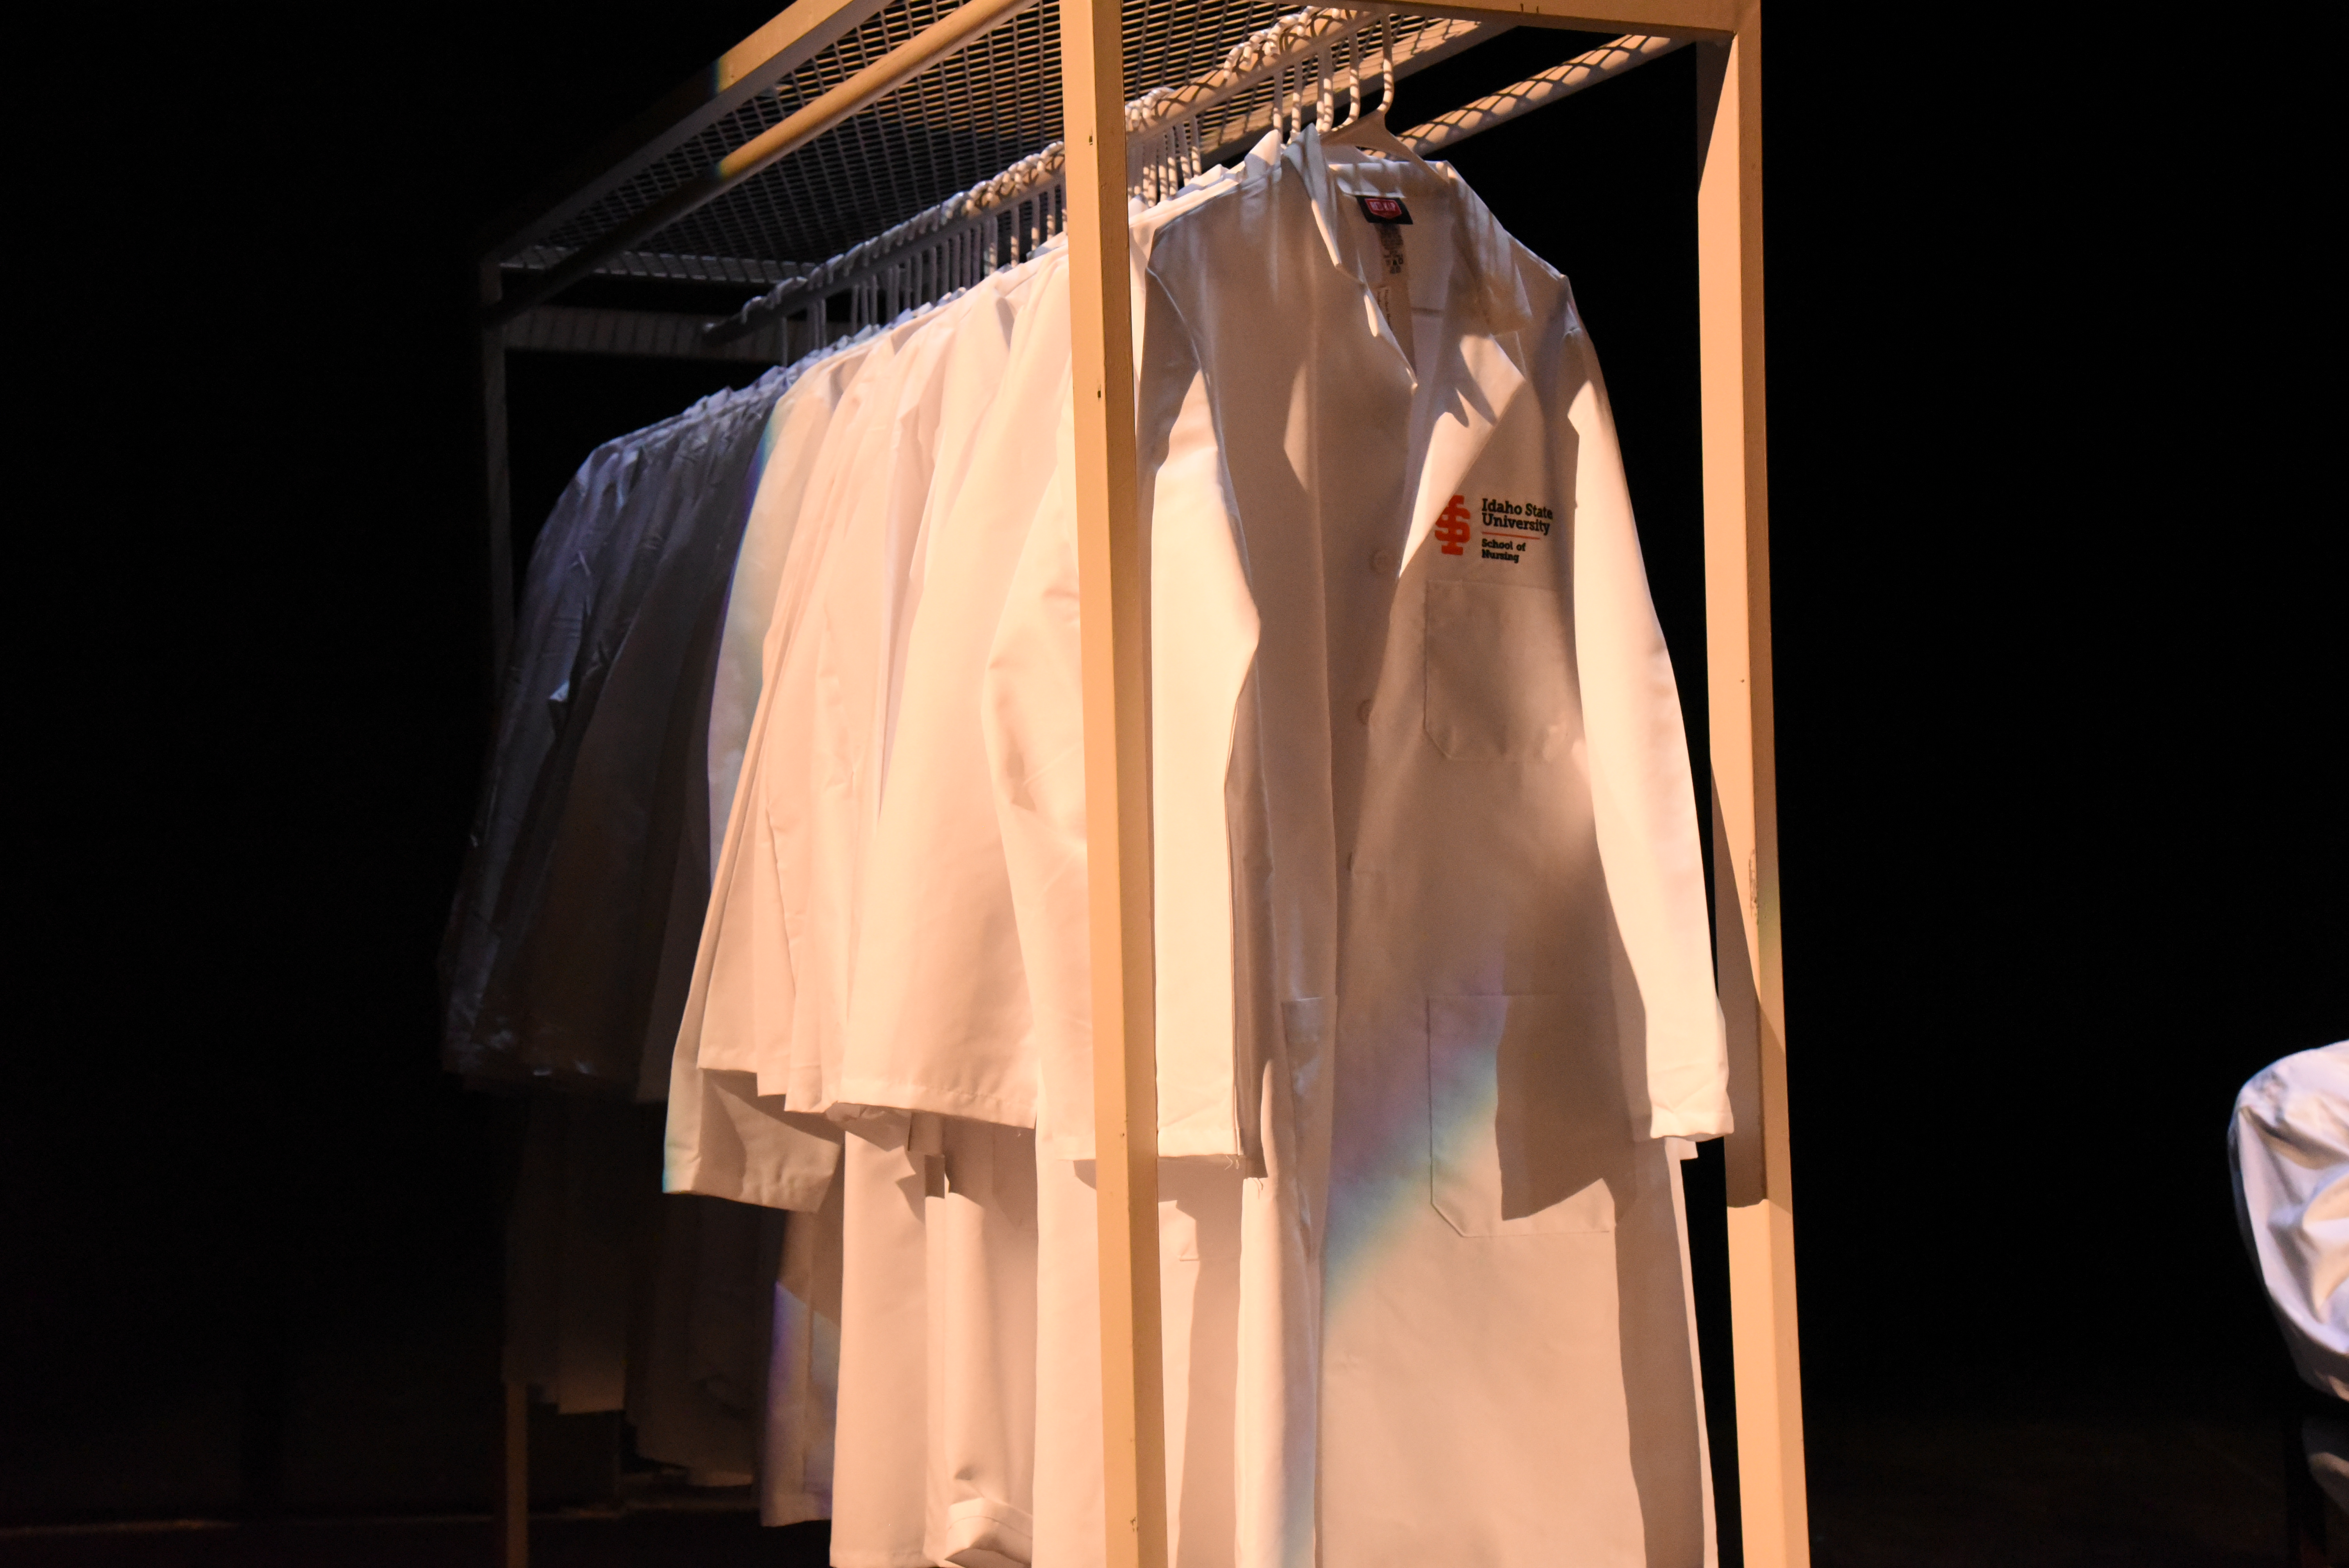 A group of white coats hanging on a garment rack. The embroidery on the chest says 